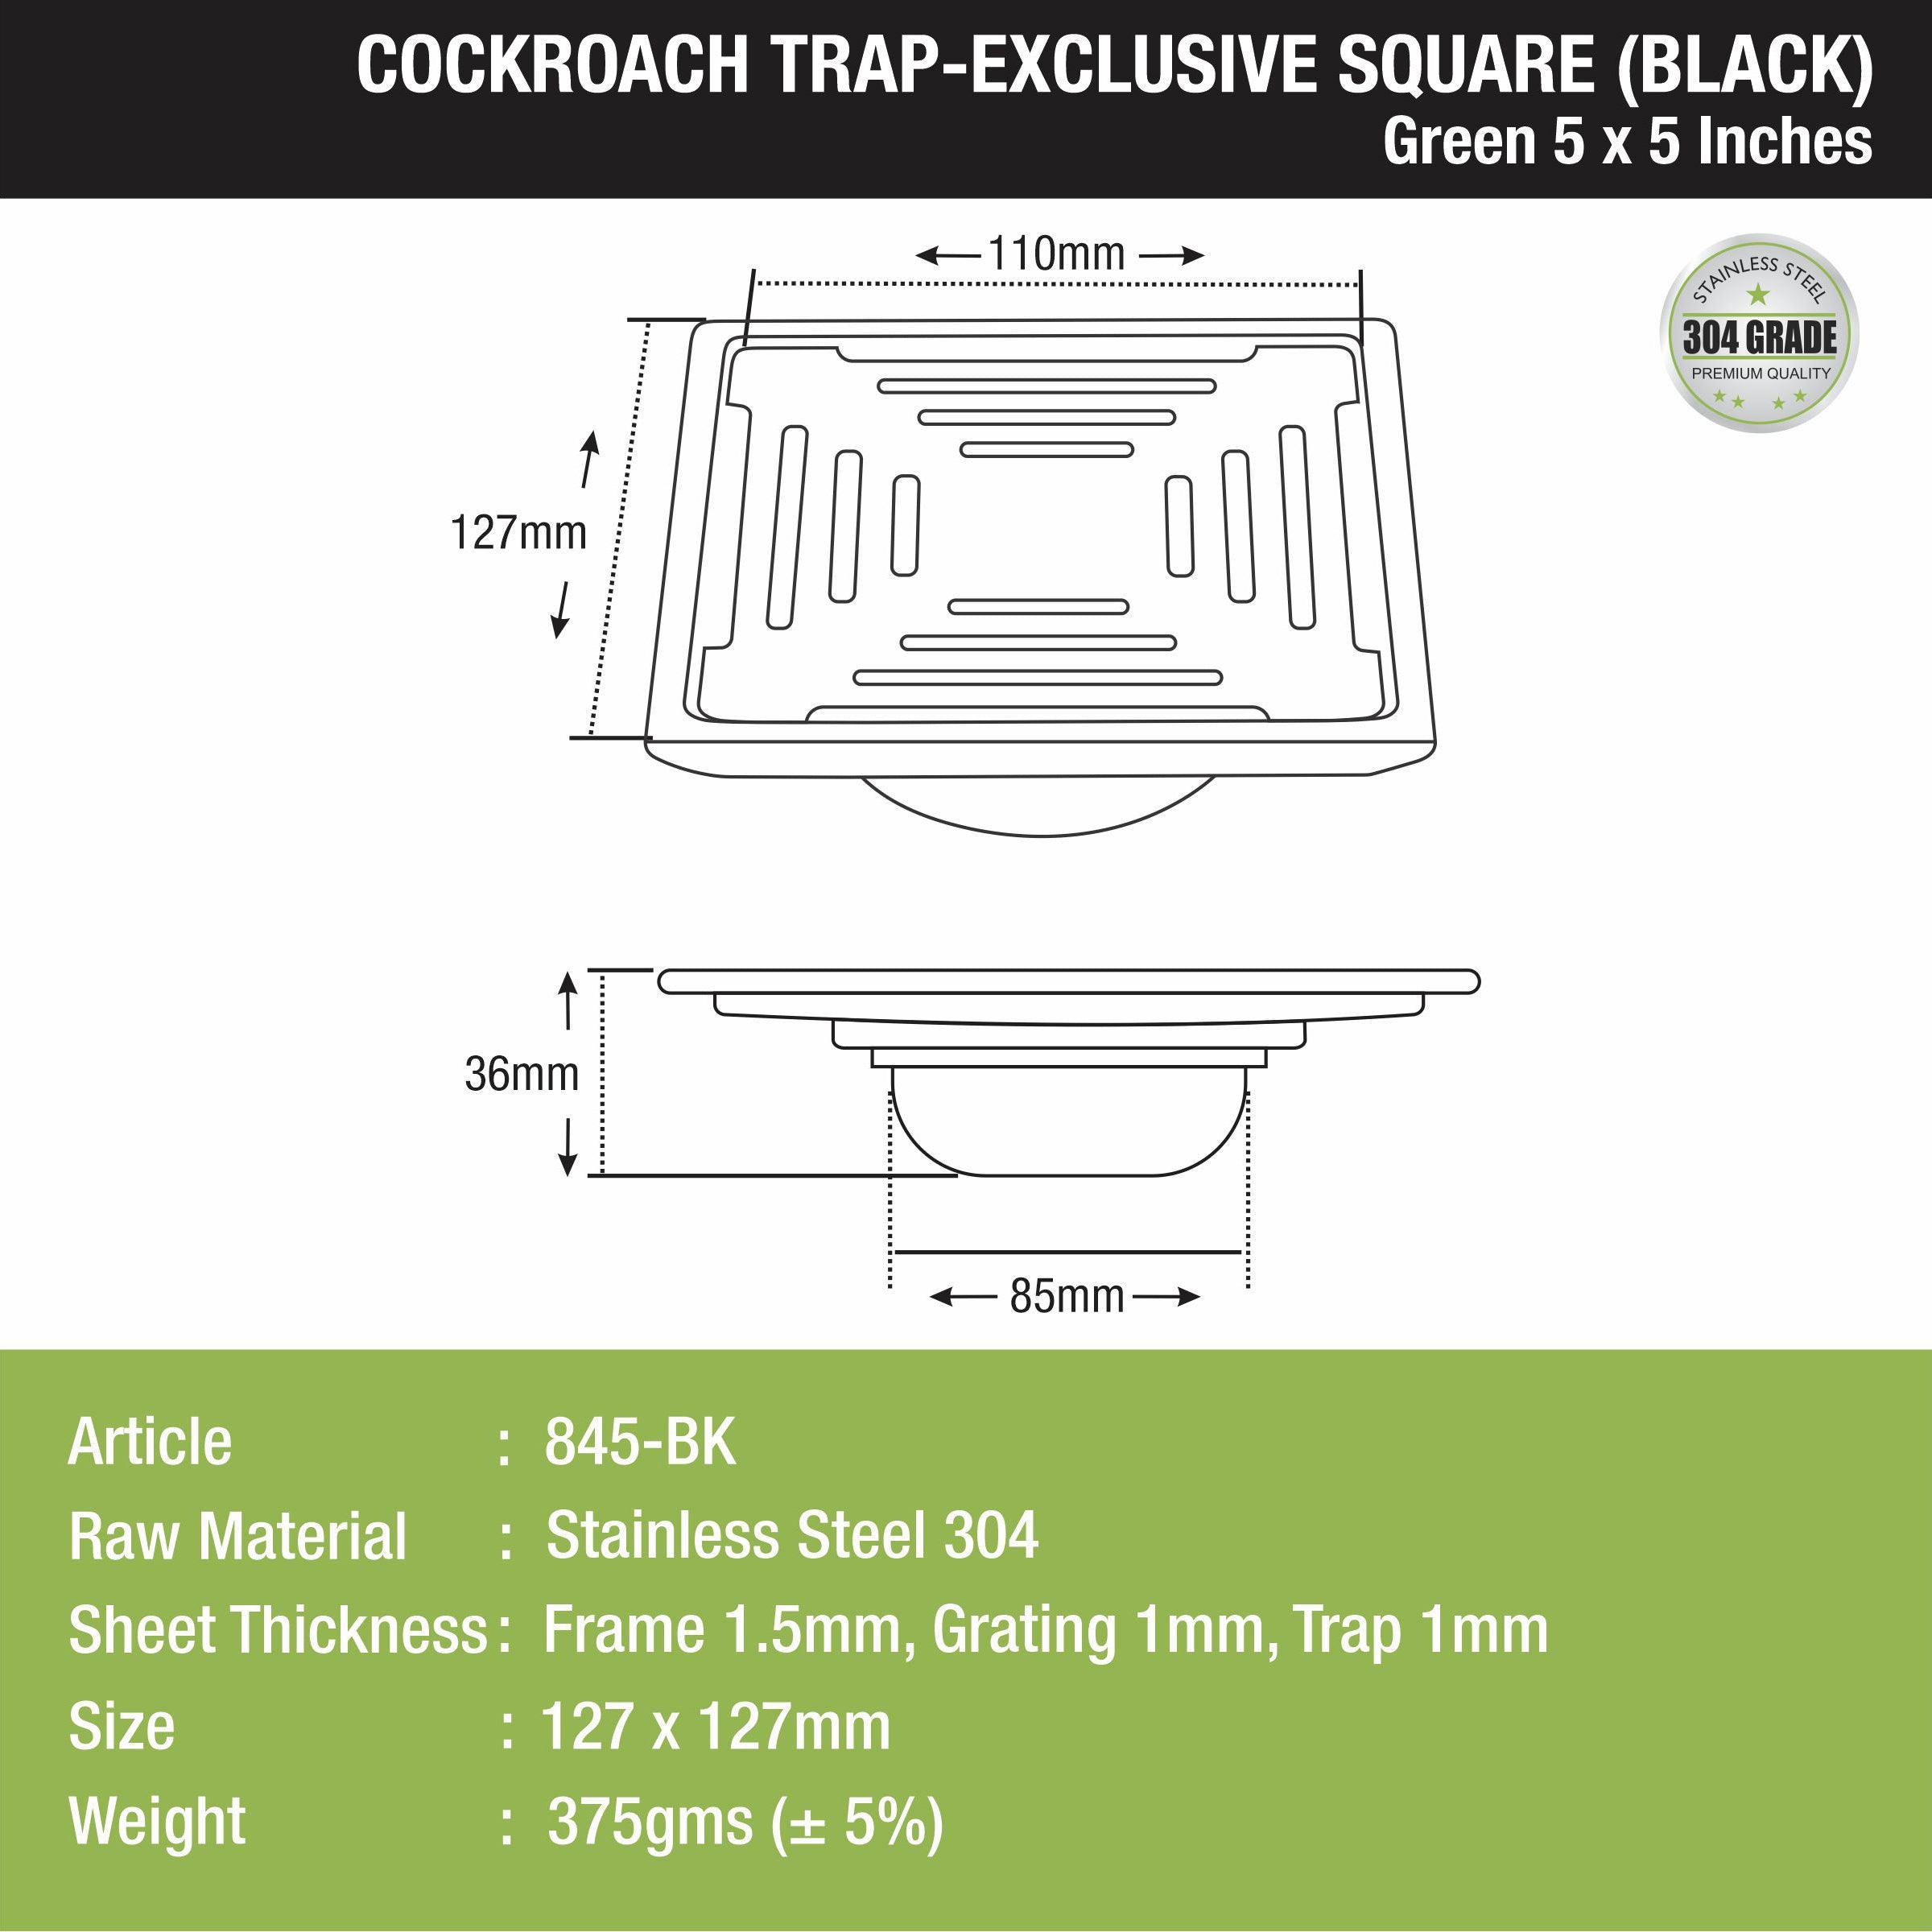 Green Exclusive Square Floor Drain in Black PVD Coating (5 x 5 Inches) with Cockroach Trap size and measurement